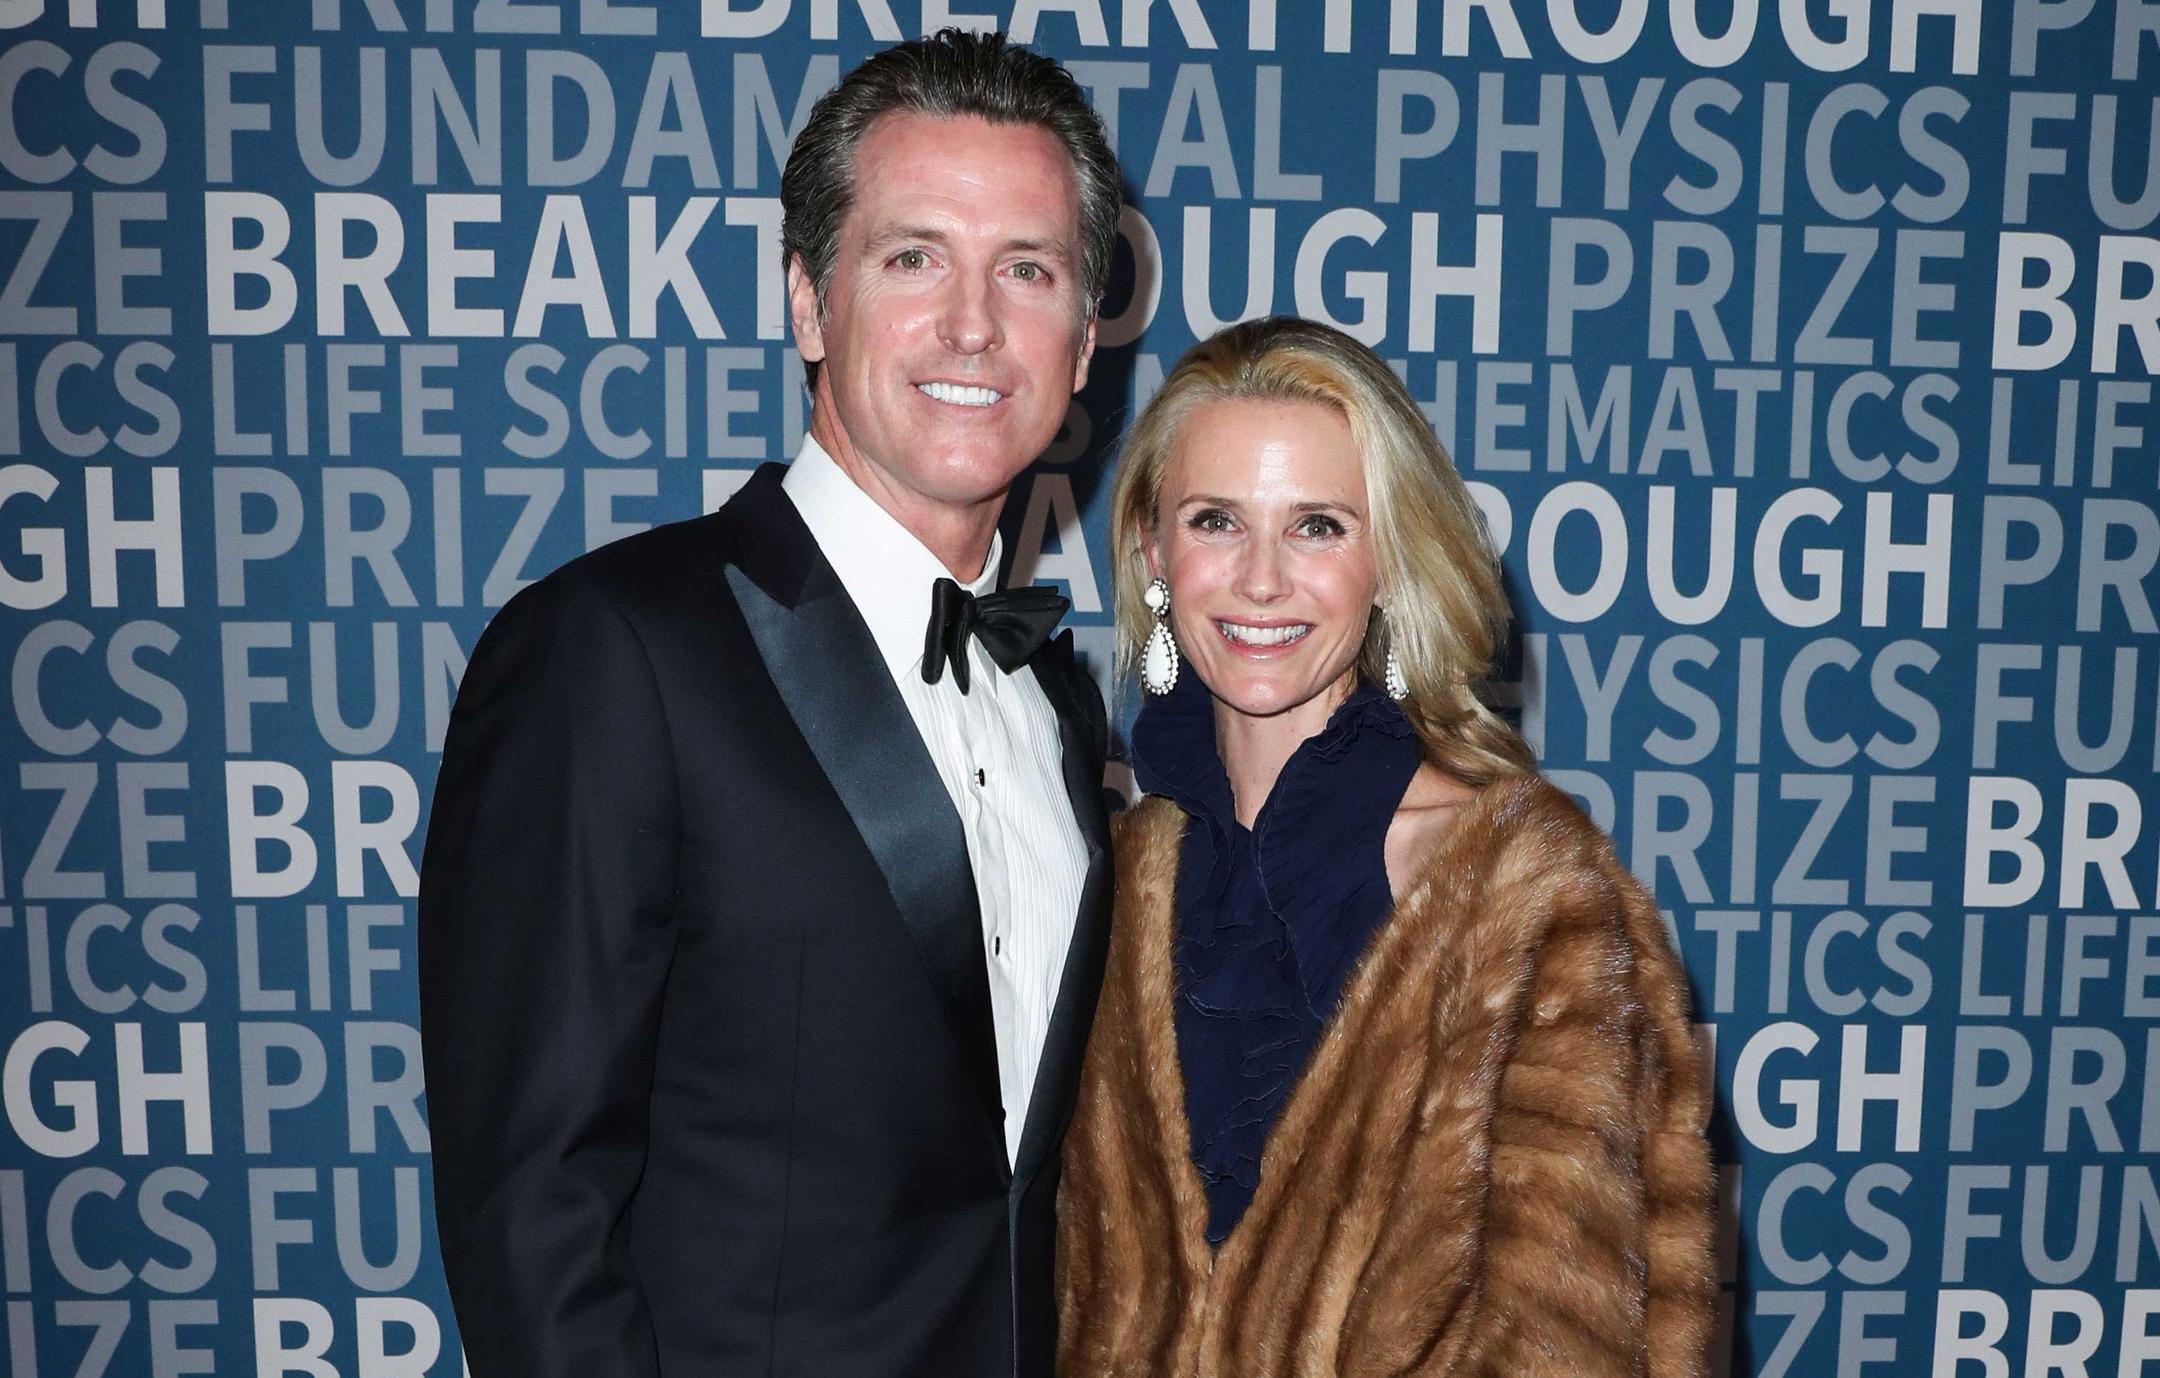 Gavin Newsom S Wife Sent Email To Harvey Weinstein Begging For Help On Governor S Cheating Scandal